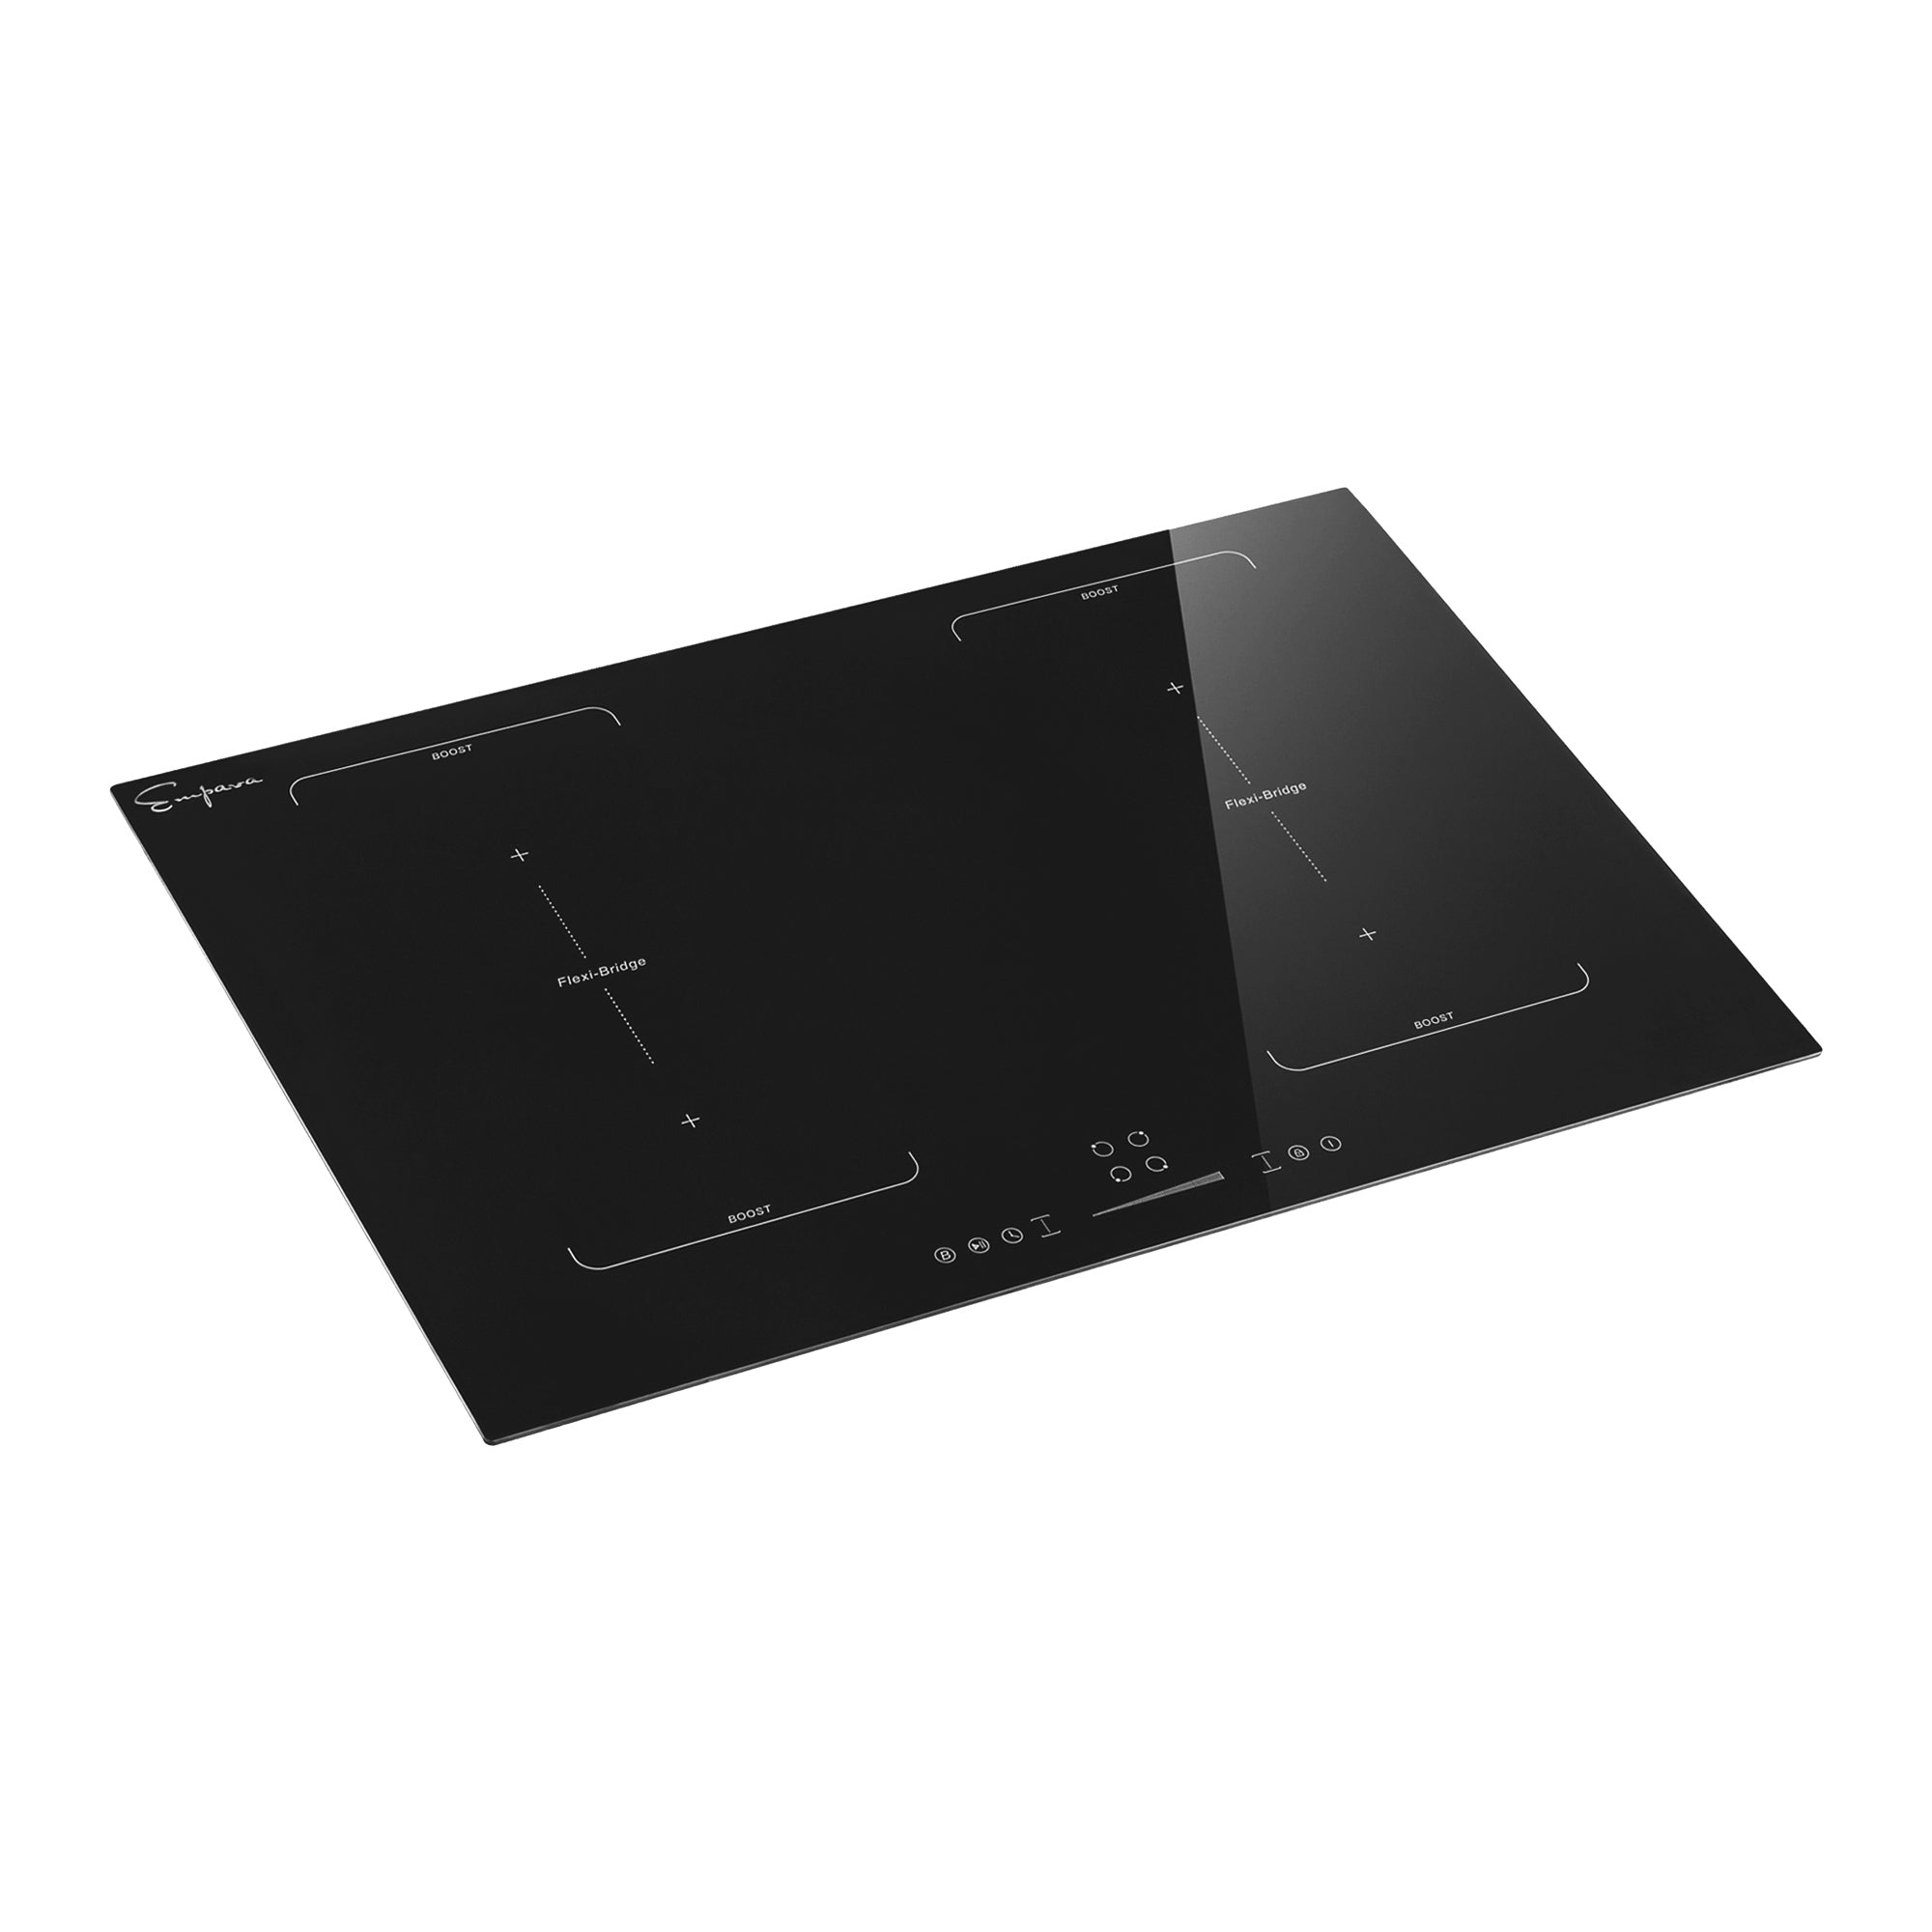 Empava 30 Inch Black Electric Stove Induction Cooktop